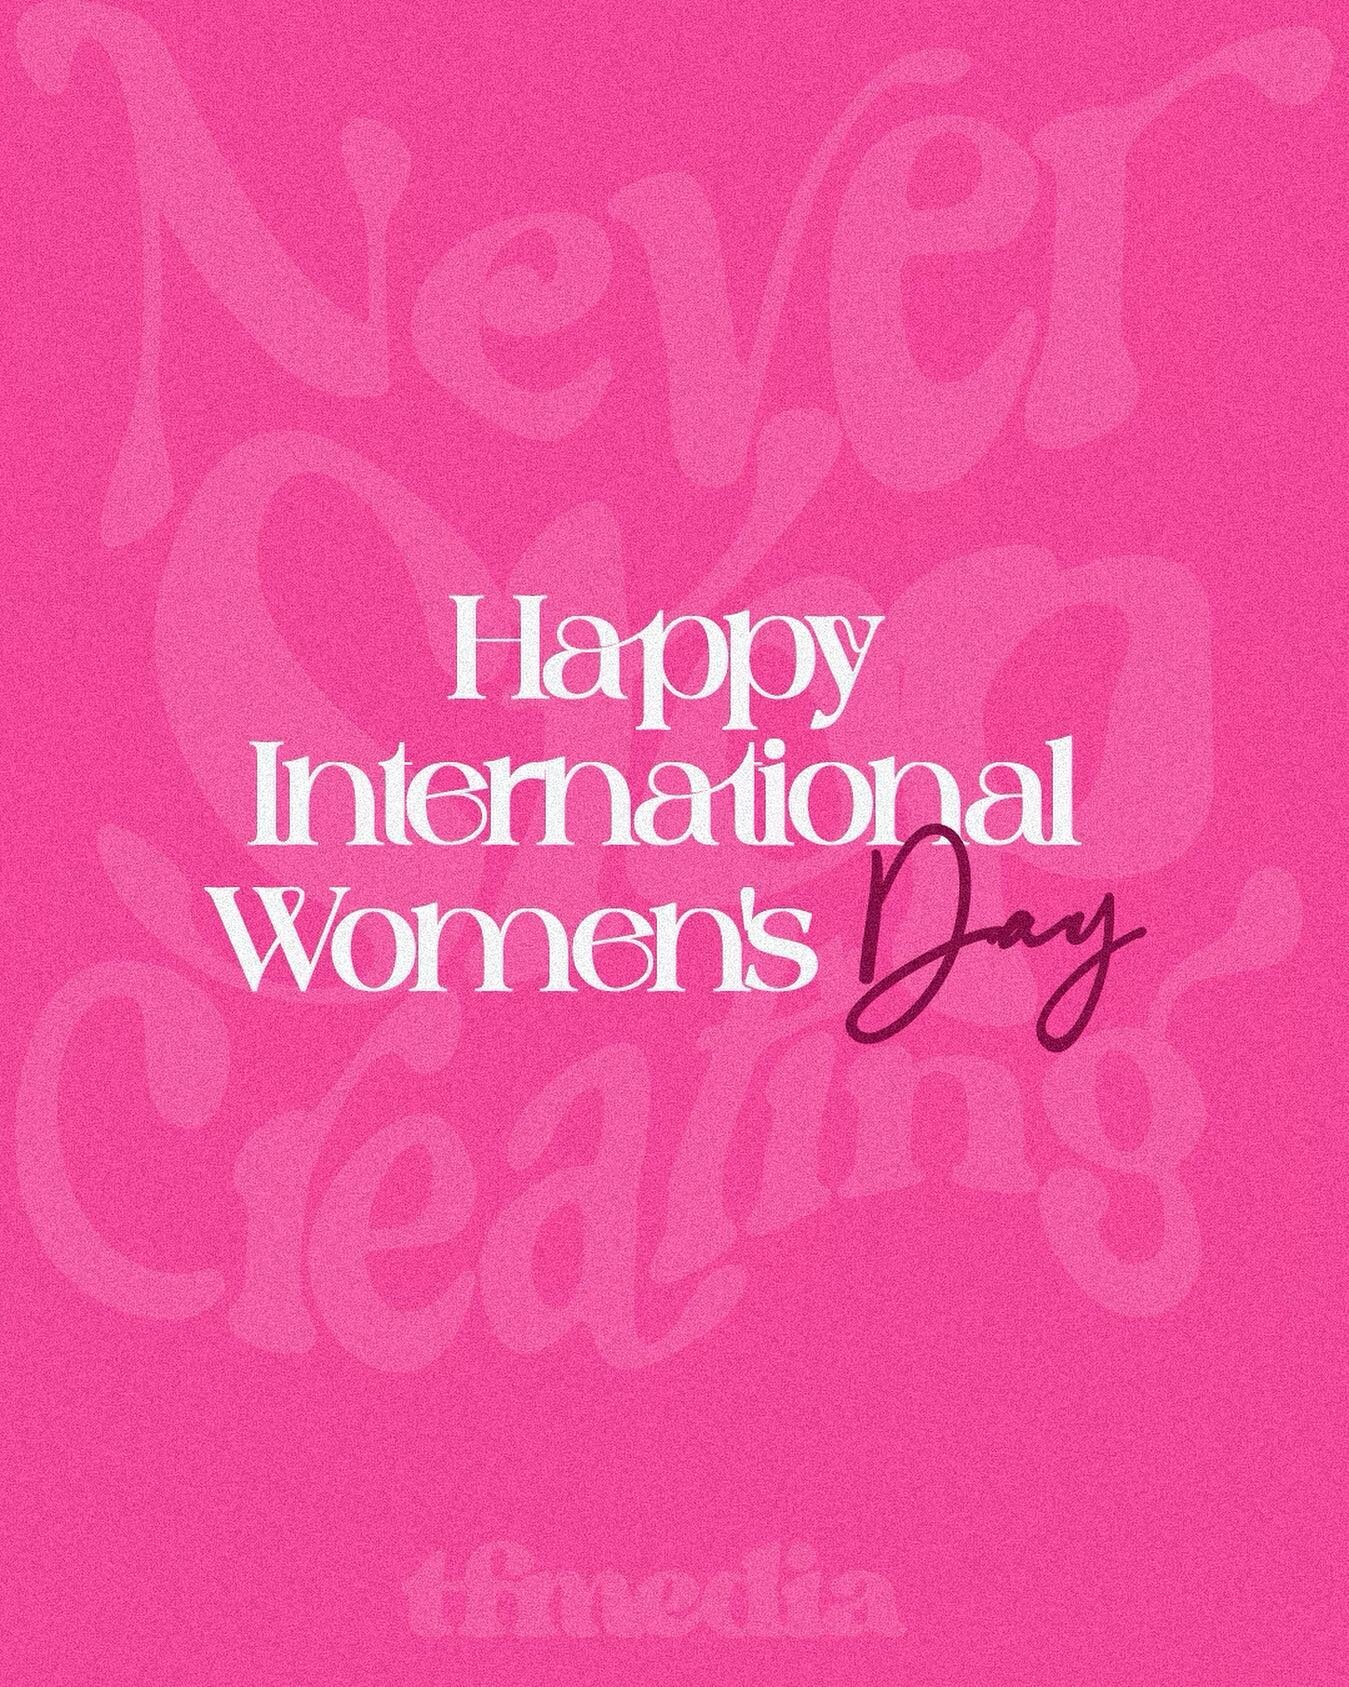 Thankful for the women in our lives. Without you, there wouldn&rsquo;t be an us! 💖💖💖 
Tag the women in your life that you&rsquo;re thankful for! #internationalwomensday #womenshistorymonth #womenempowerment #girlsruntheworld #girlsrule #womenshers